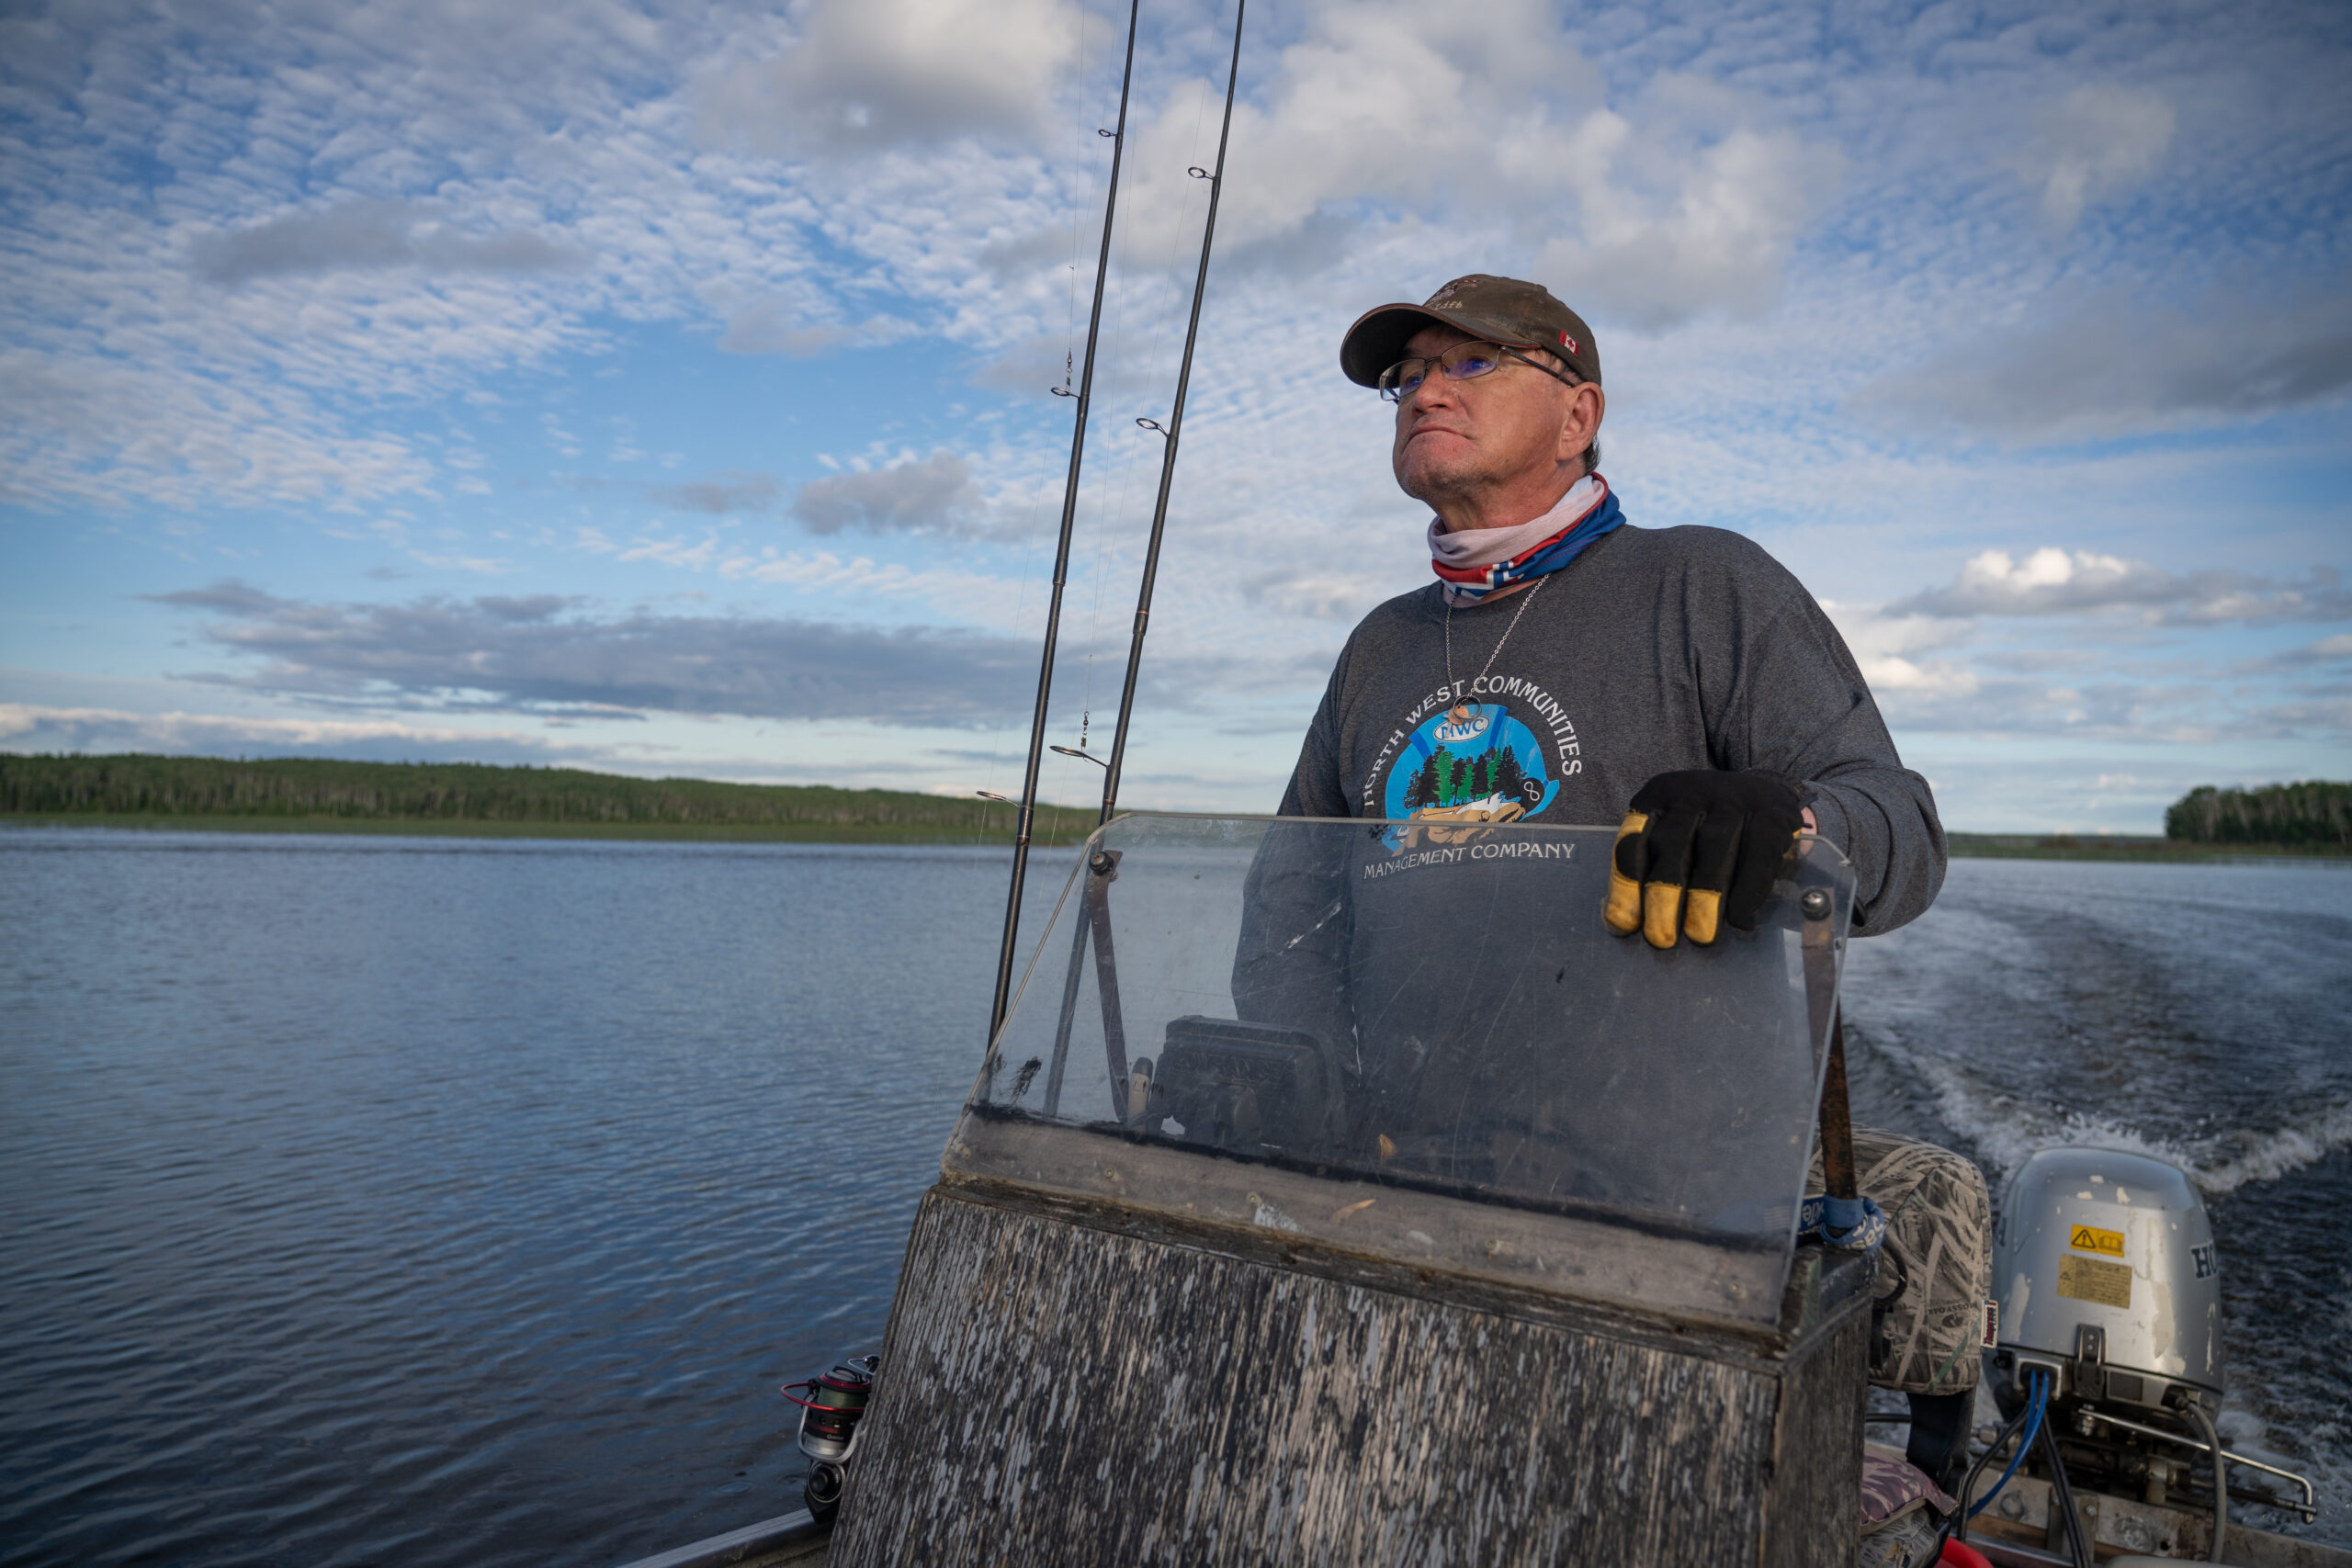 Peter Durocher, manager of Sakitawak, on his boat in the lake.